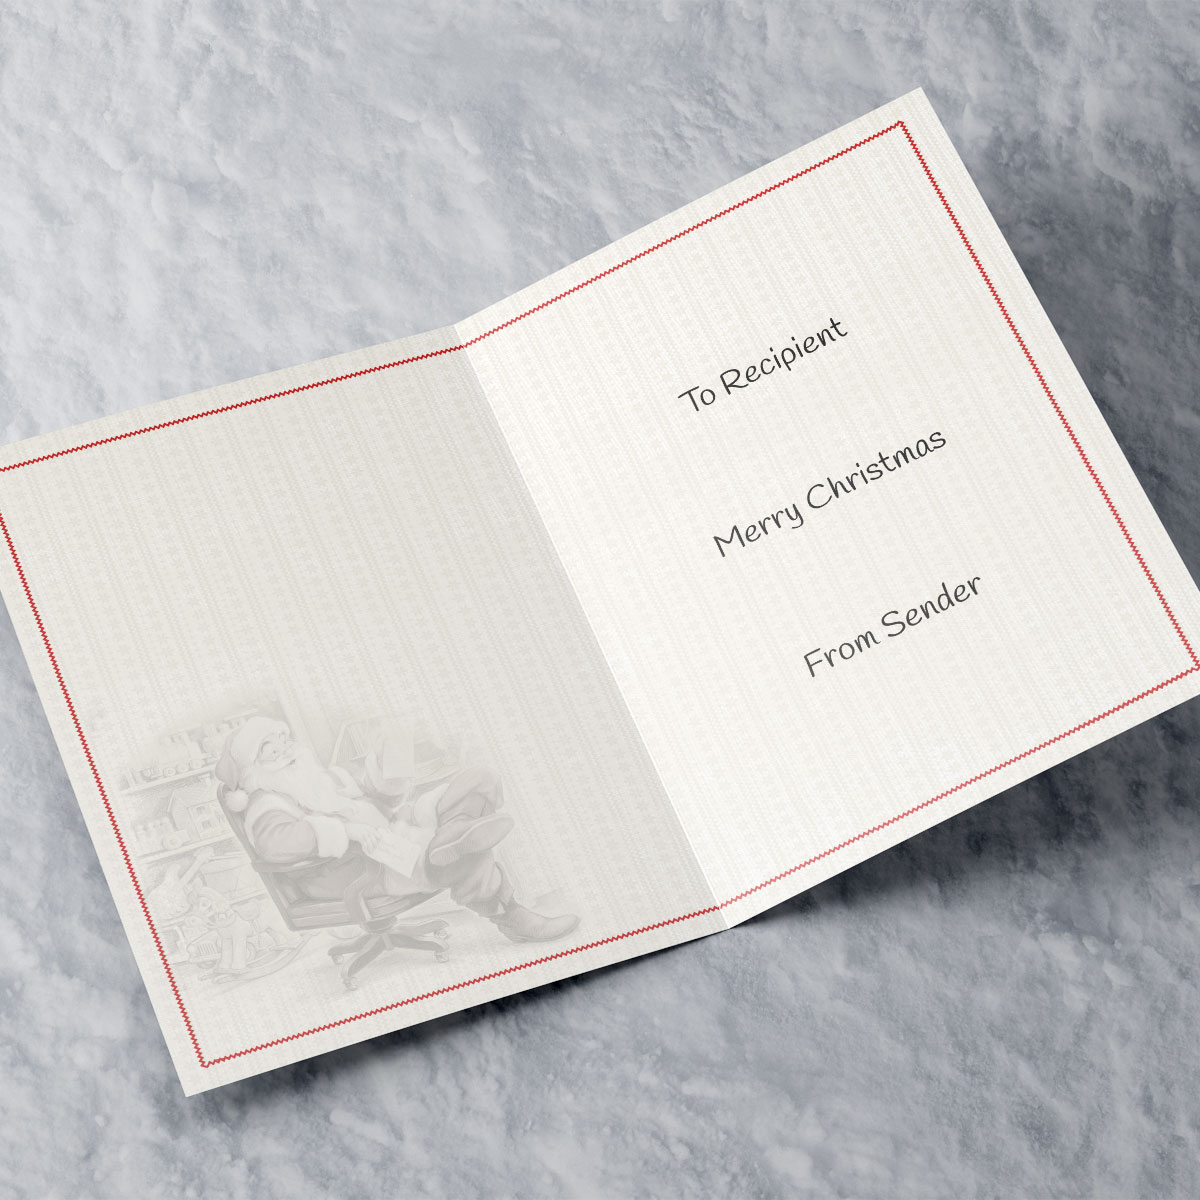 Personalised Christmas Card - Festive Wishes